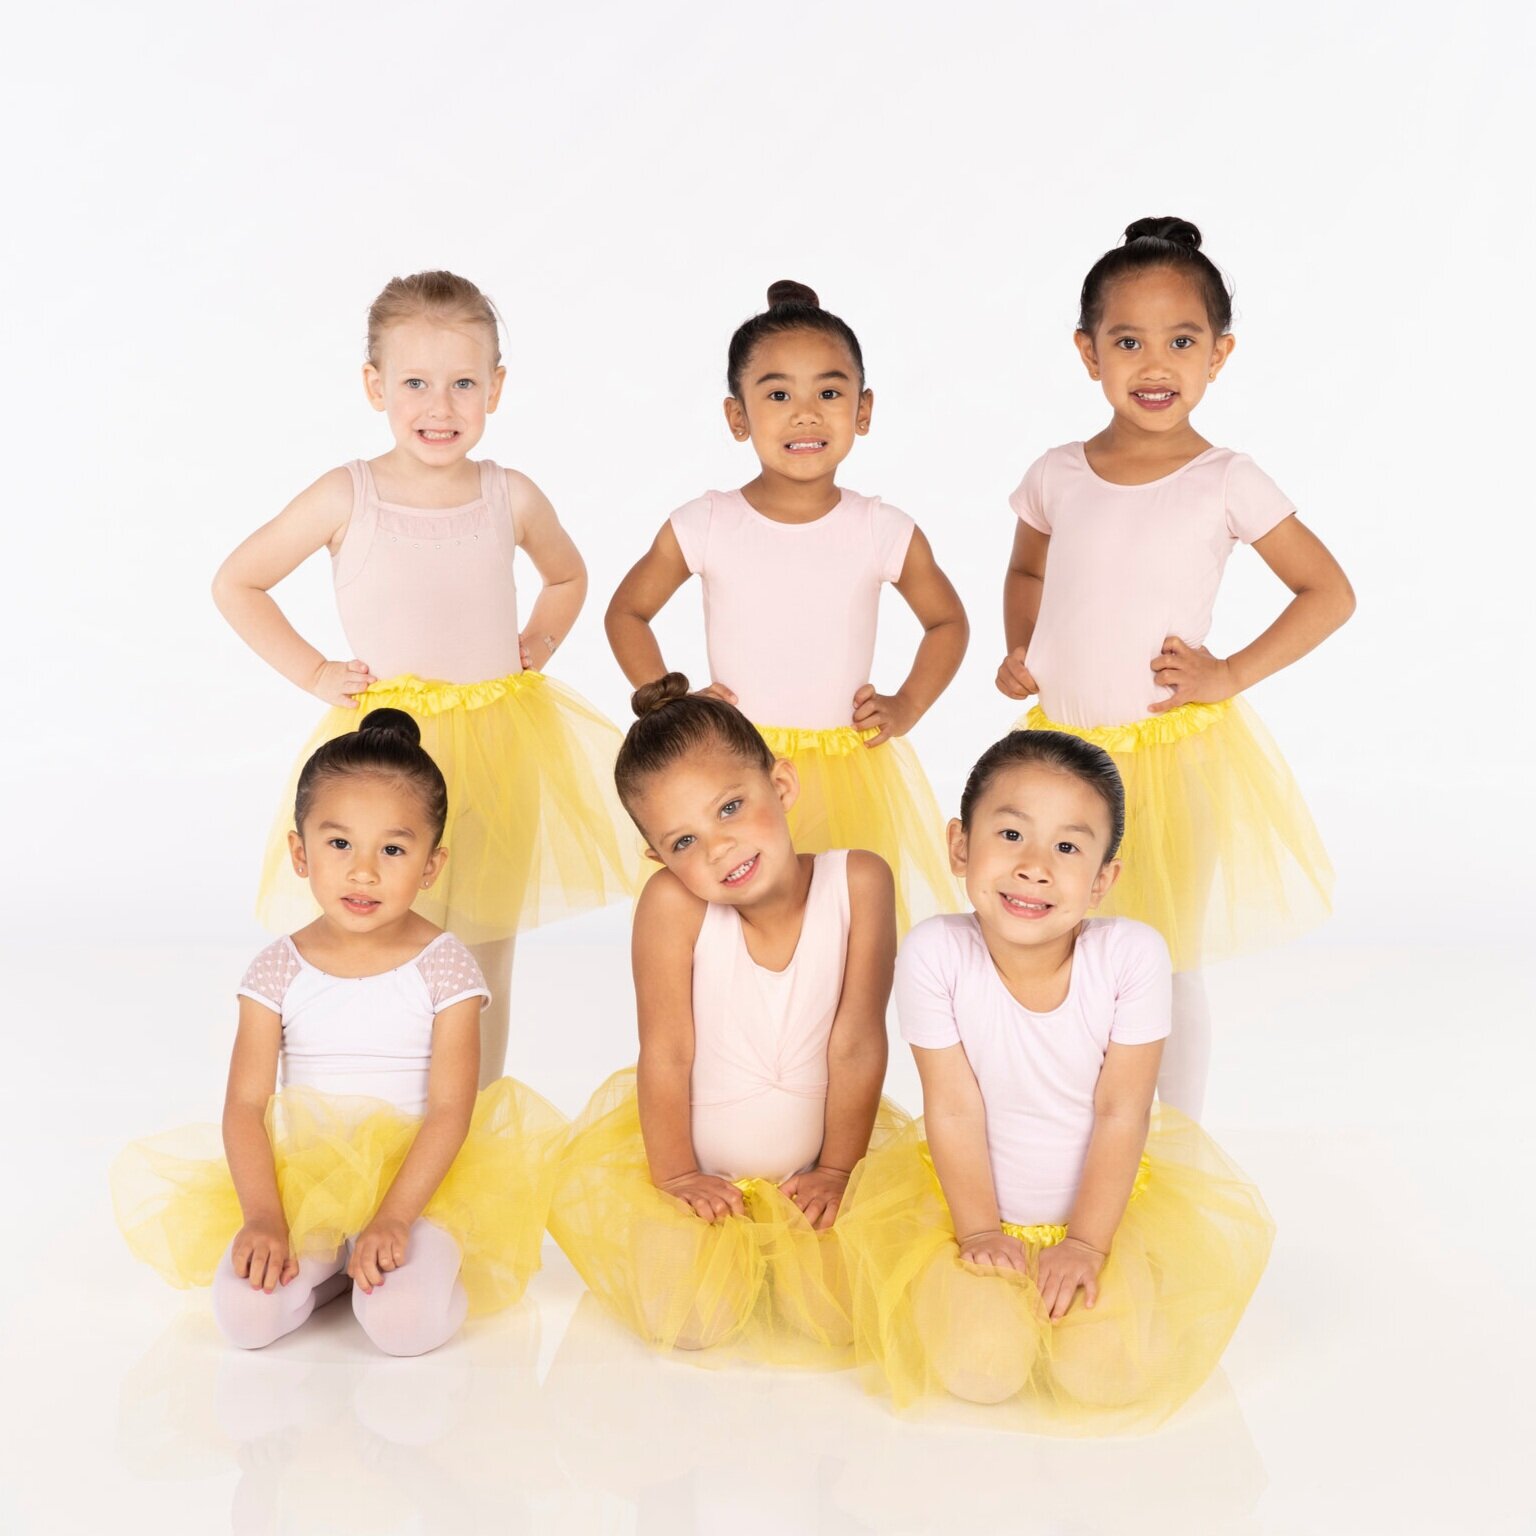 Girls in pink leotards and yellow tutus. (Copy) (Copy) (Copy) (Copy) (Copy) (Copy) (Copy)